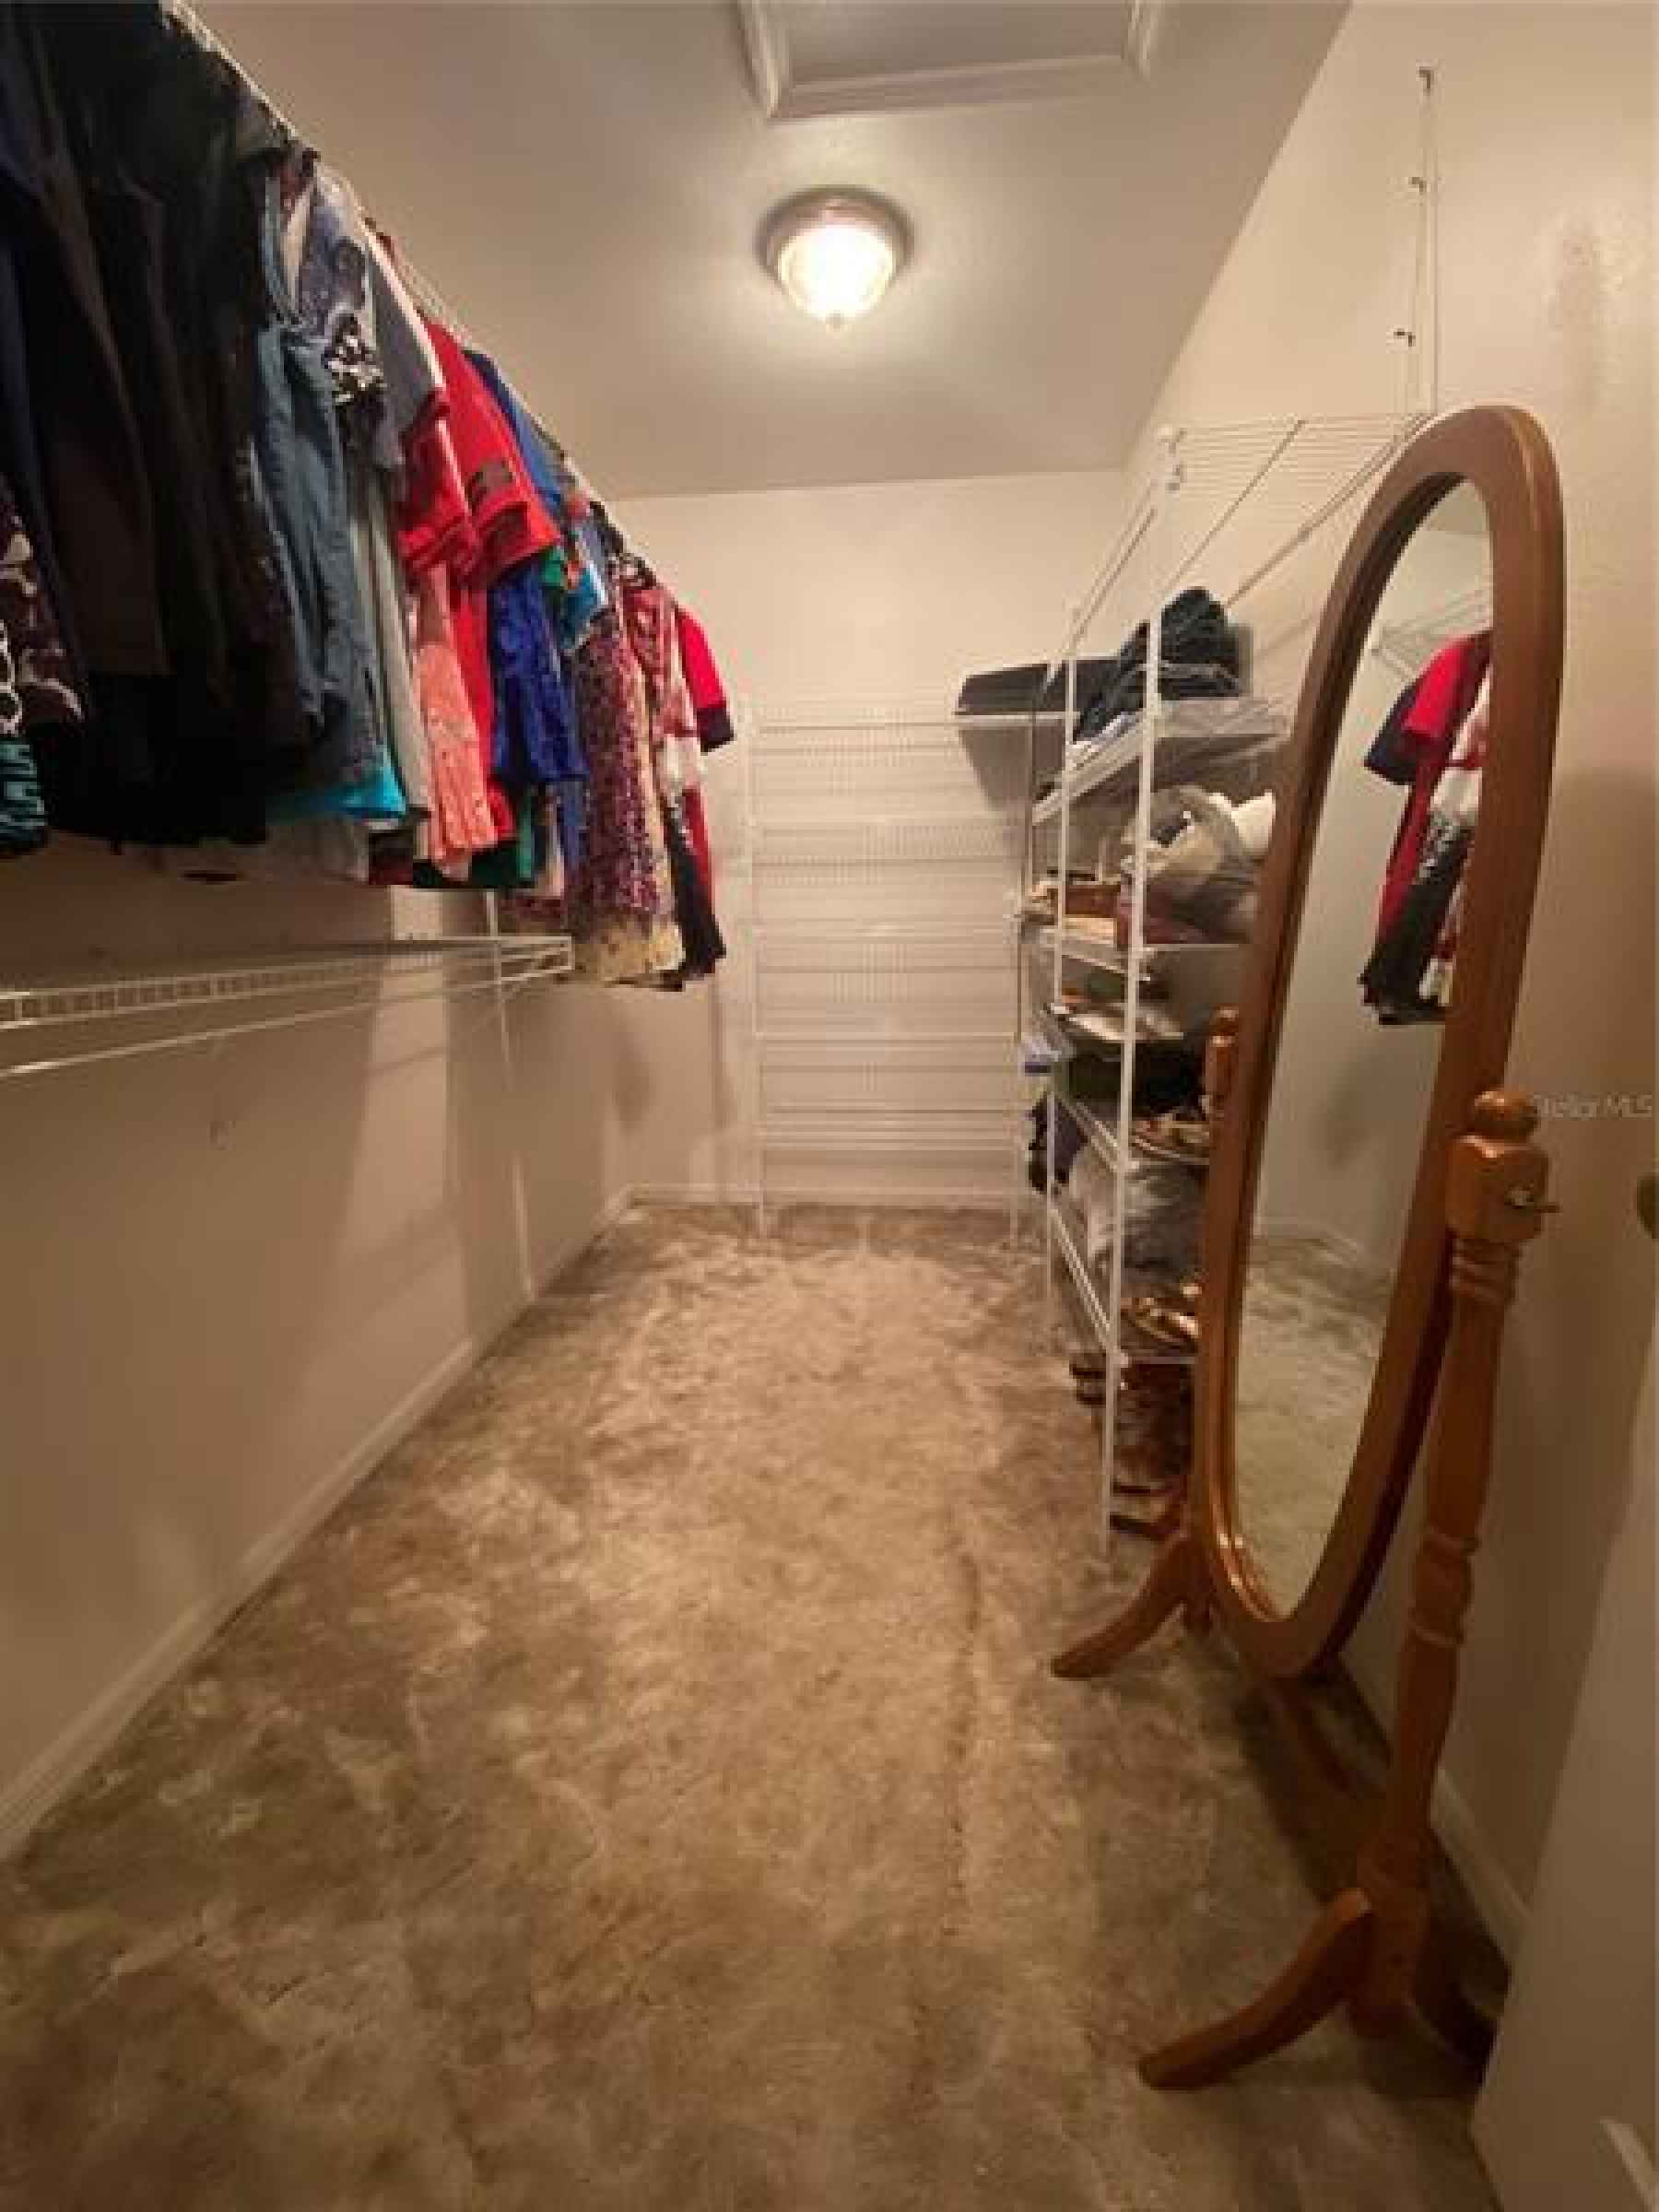 THIS IS THE MASTER BEDROOM WALK-IN CLOSET!